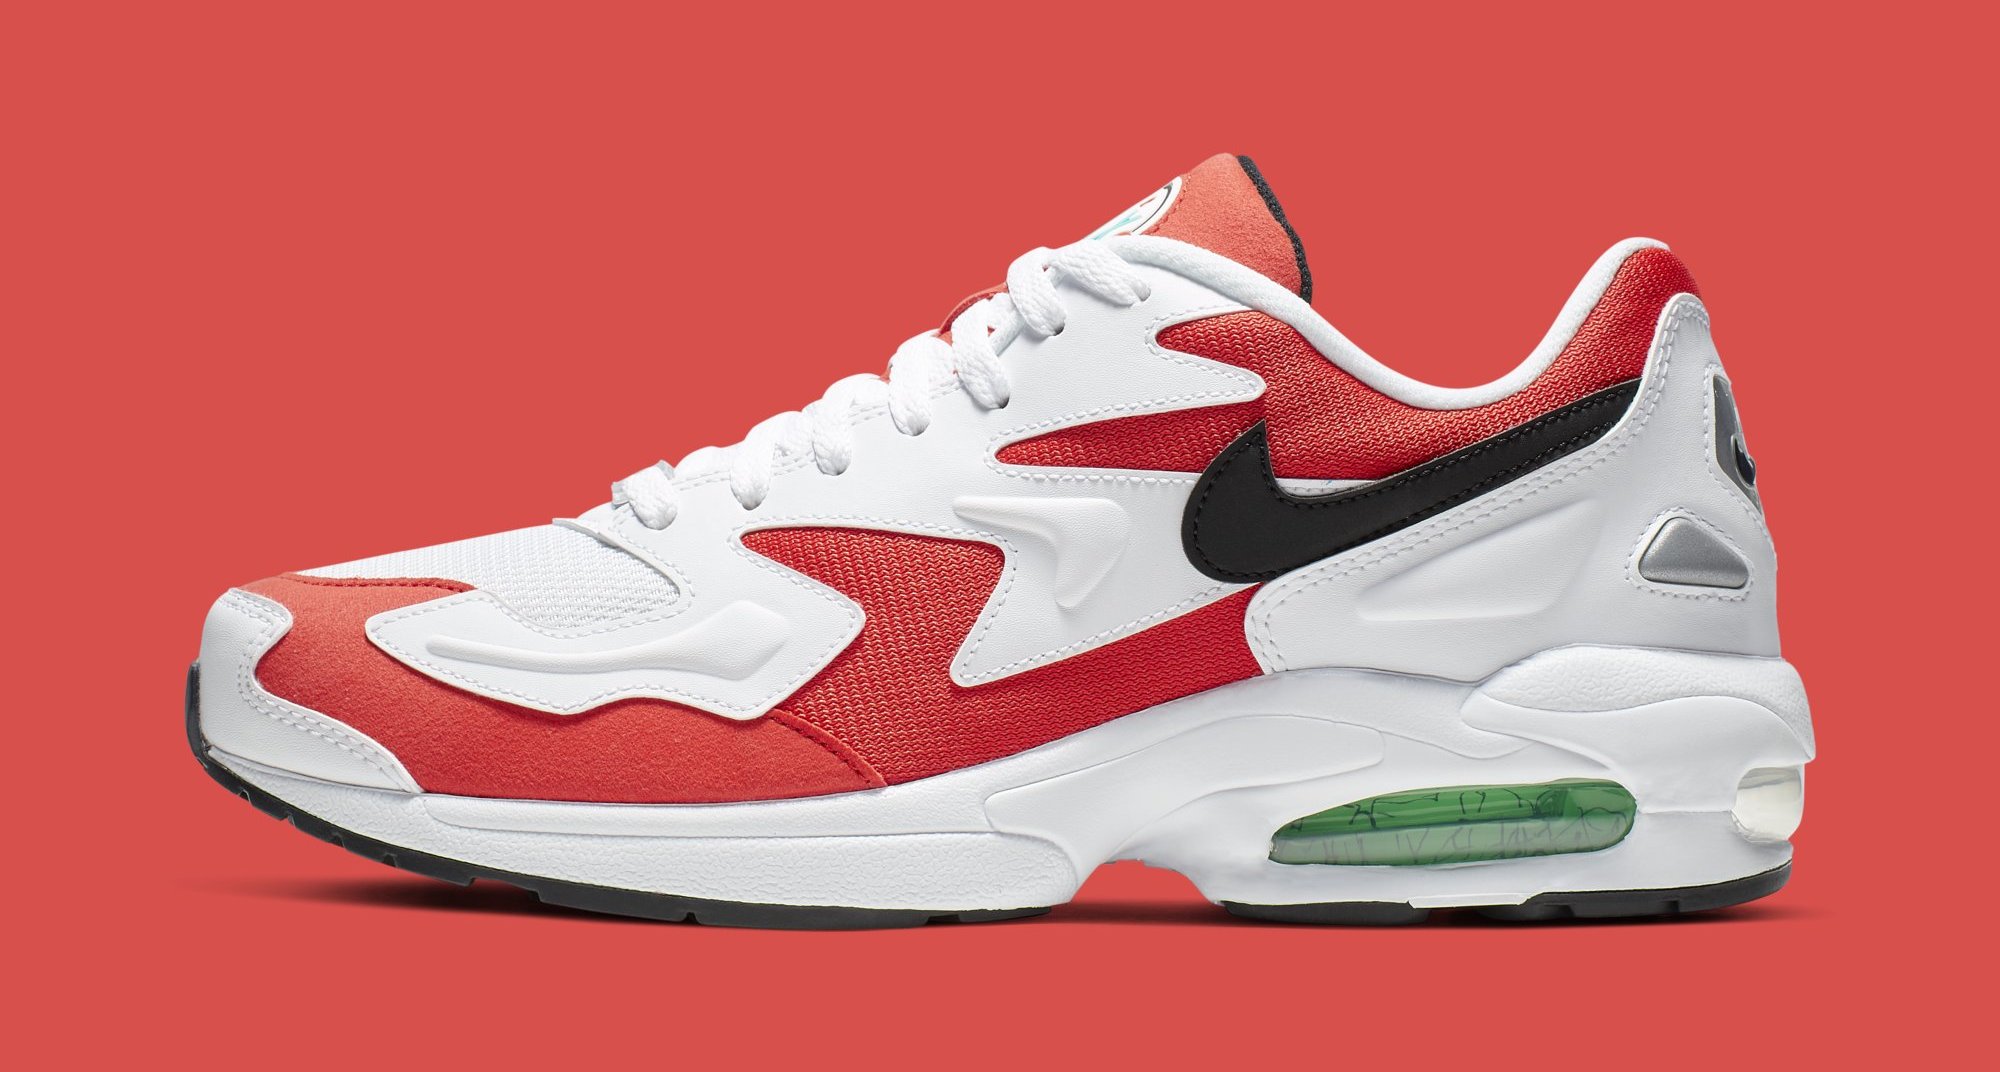 Nike Air Max2 Light &#x27;White/Black Habanero Red Cool Grey&#x27; AO1741 101 (Lateral)